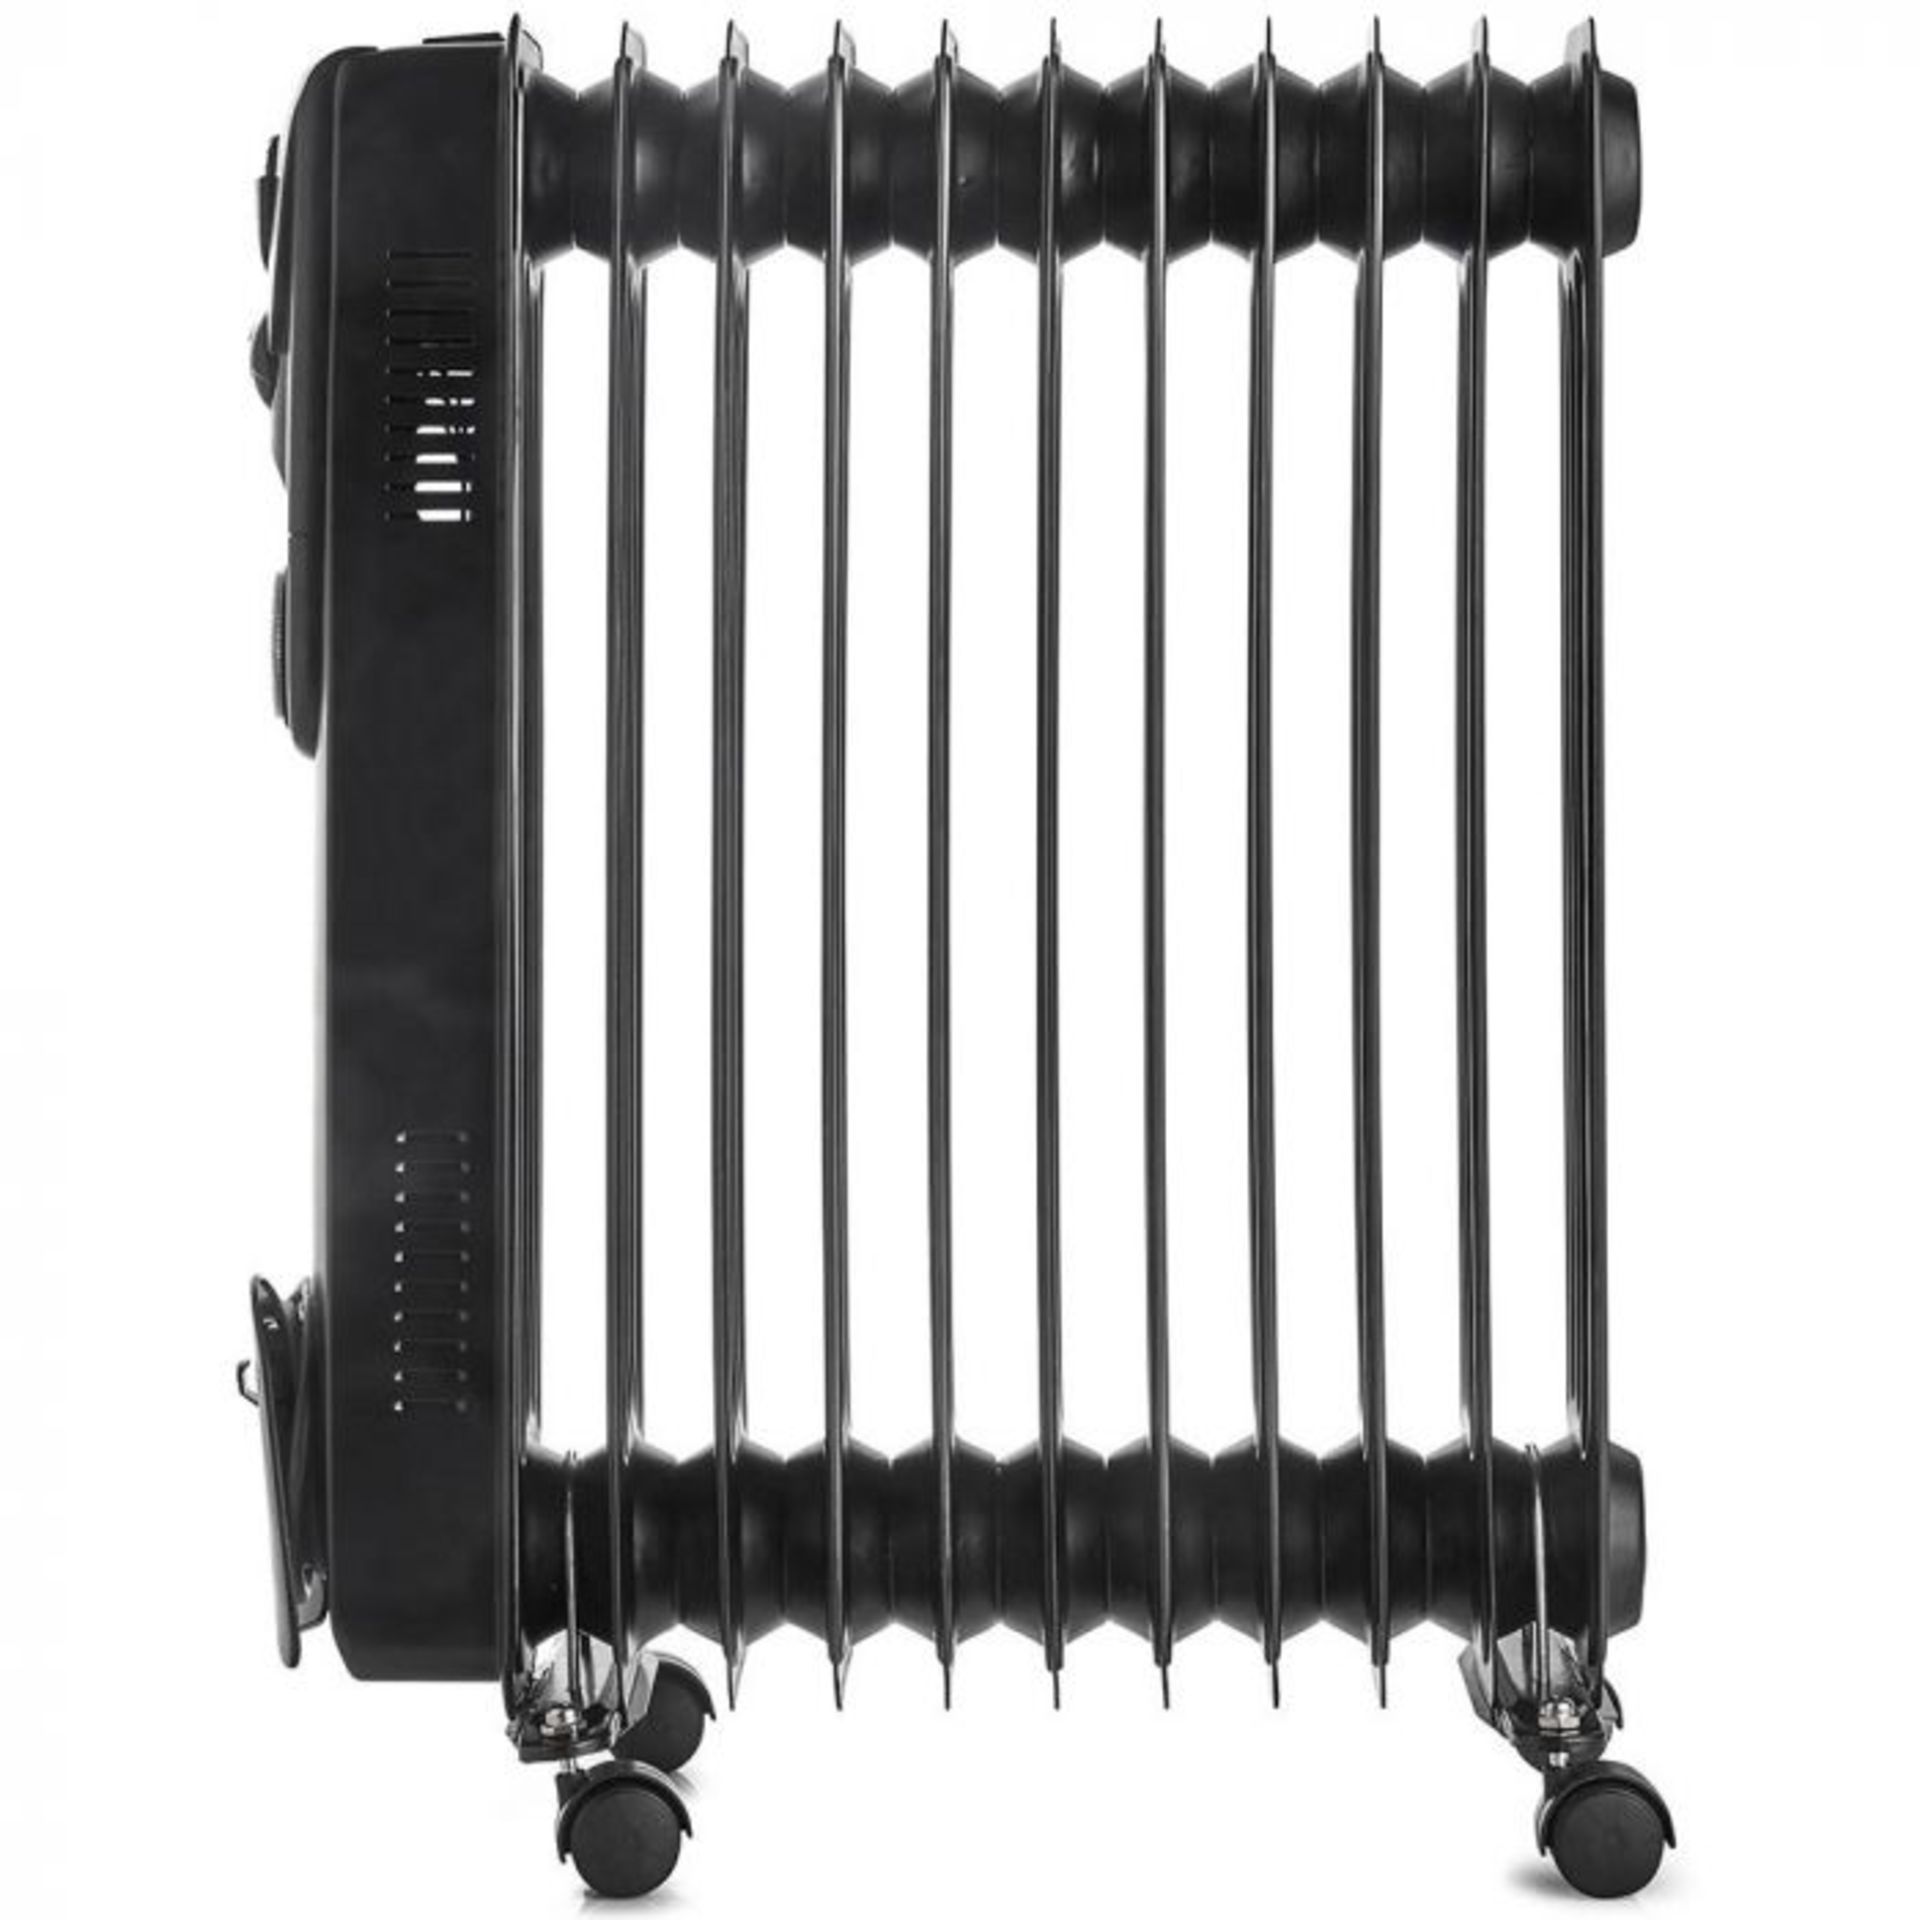 (S357) 11 Fin 2500W Oil Filled Radiator - Black 2500W radiator with 11 oil-filled fins for hea... - Image 3 of 3